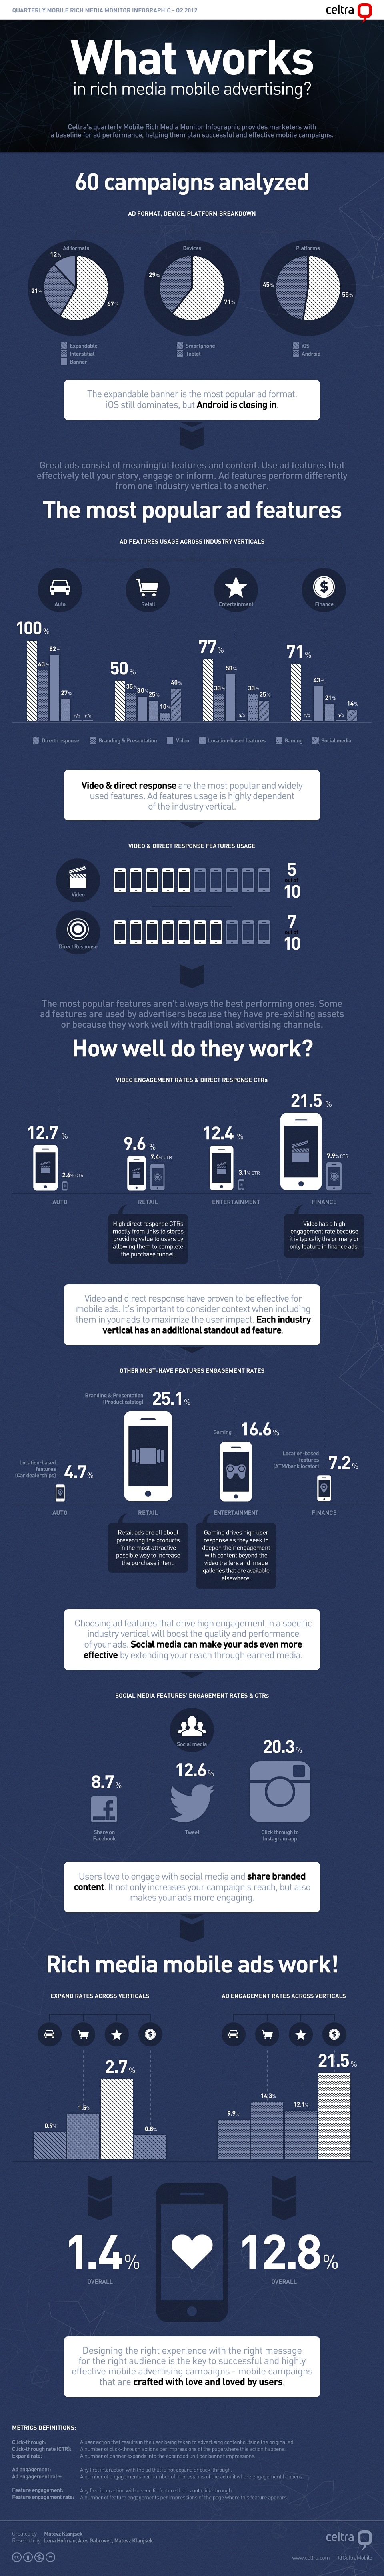 Best Working Mobile Advertising Formats [Infographic]